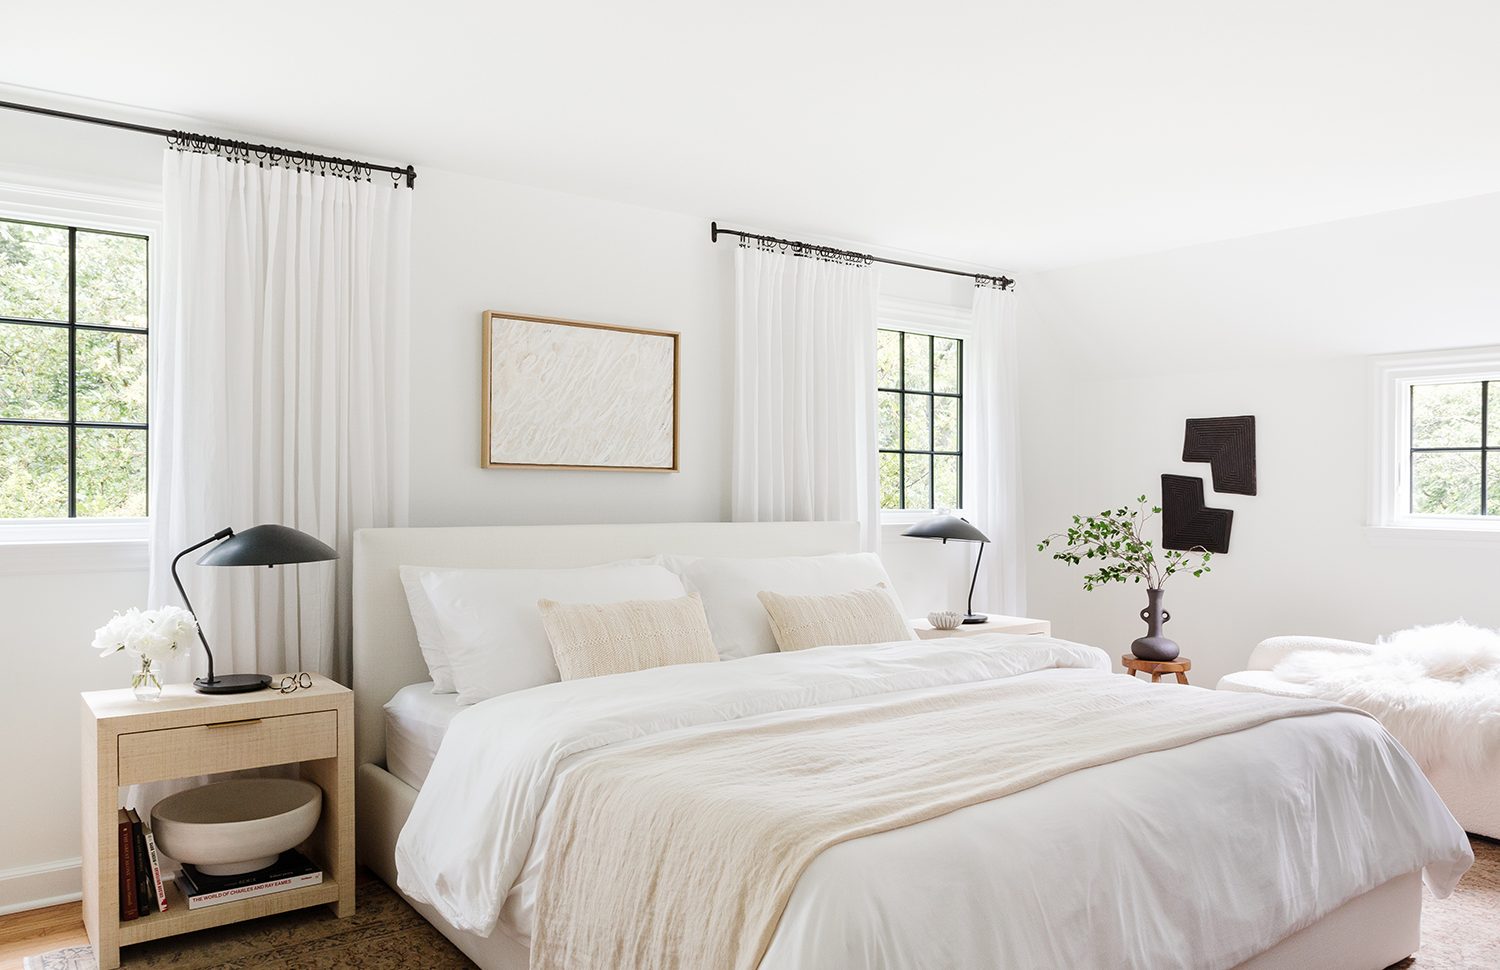 These 9 Serene Bedroom Color Palettes Feel Simultaneously Calm & Chic |  Havenly Blog | Havenly Interior Design Blog